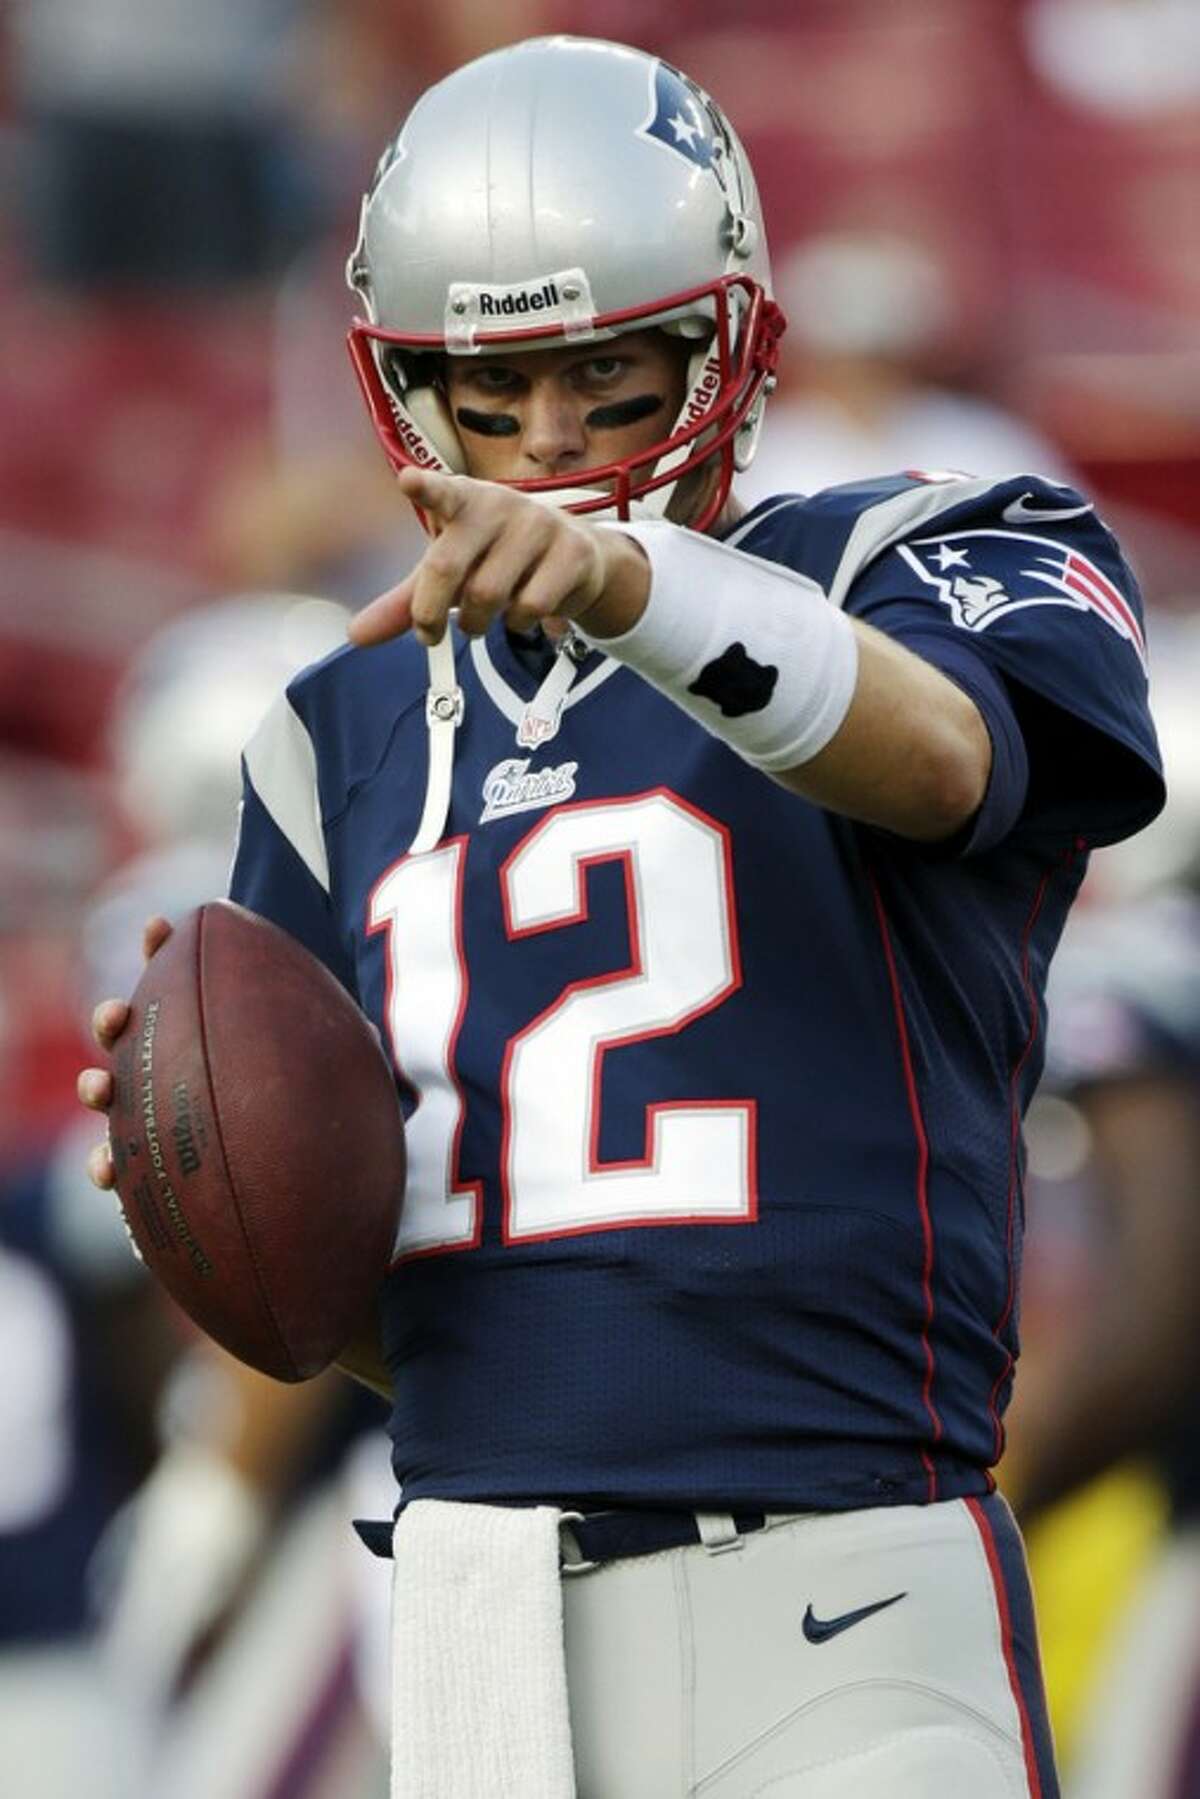 FILE - In this Aug. 24, 2012, file photo, New England Patriots quarterback Tom Brady warms up prior to an NFL preseason football game against the Tampa Bay Buccaneers in Tampa, Fla. The Patriots followed up a season that saw them lose just three regular-season games and nearly win the Super Bowl by adding a deep receiving threat and solidifying their defense to stack up against a soft schedule. The Patriots are scheduled to begin their regular season on Sept. 9 at the Tennessee Titans. (AP Photo/Dave Martin, File)